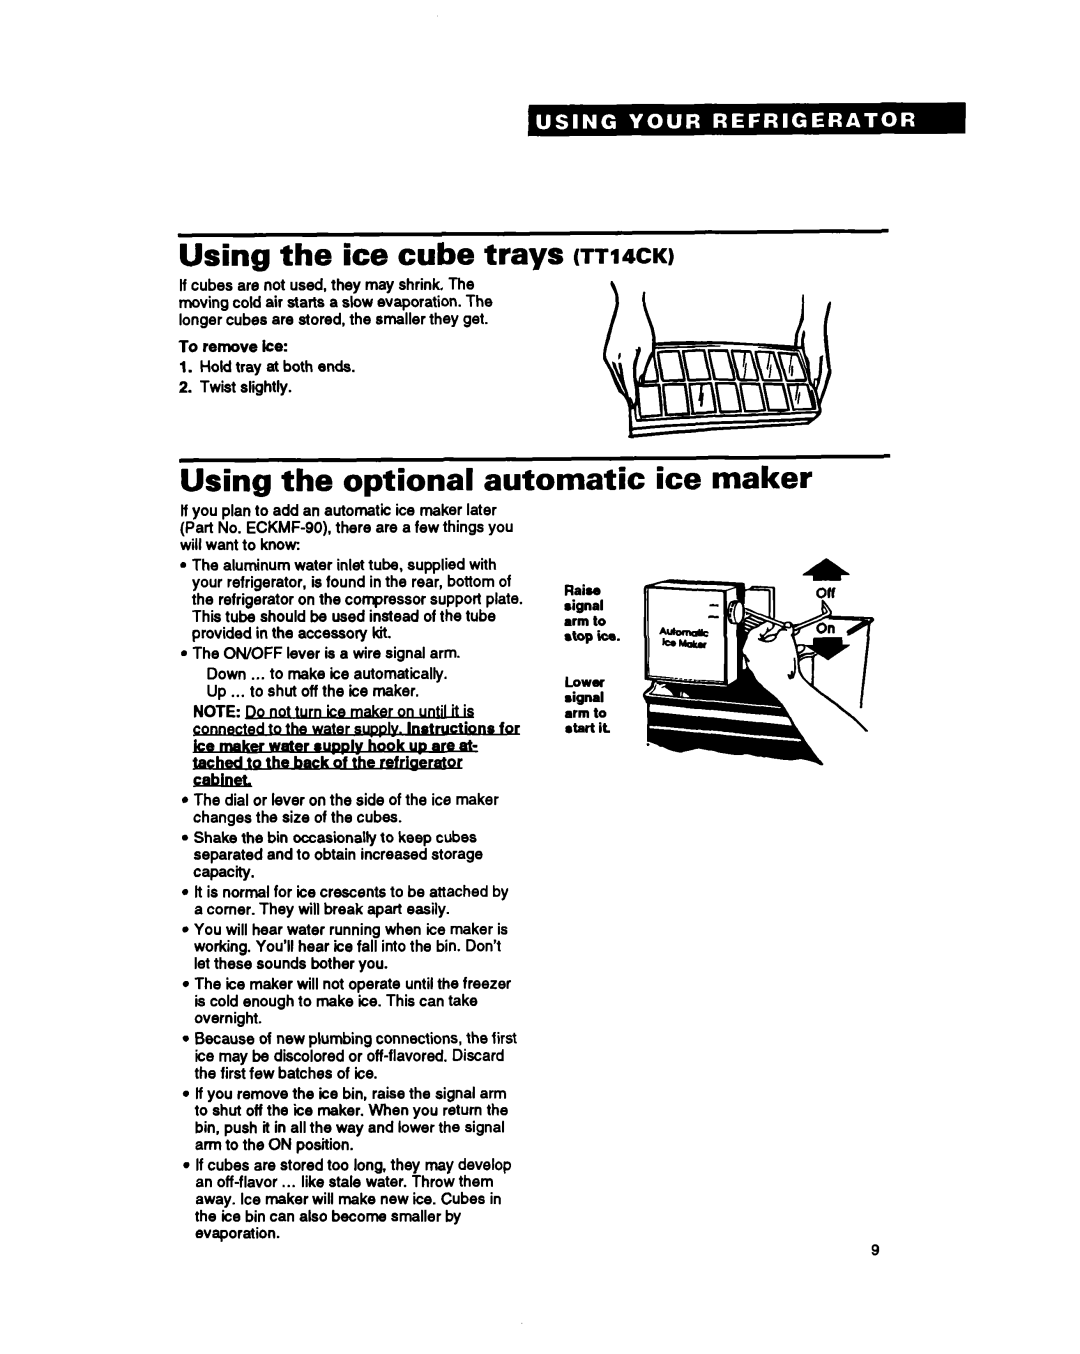 Estate LT14EK, TT14CK important safety instructions Using the ice cube trays TTIICK, Using the optional automatic ice maker 